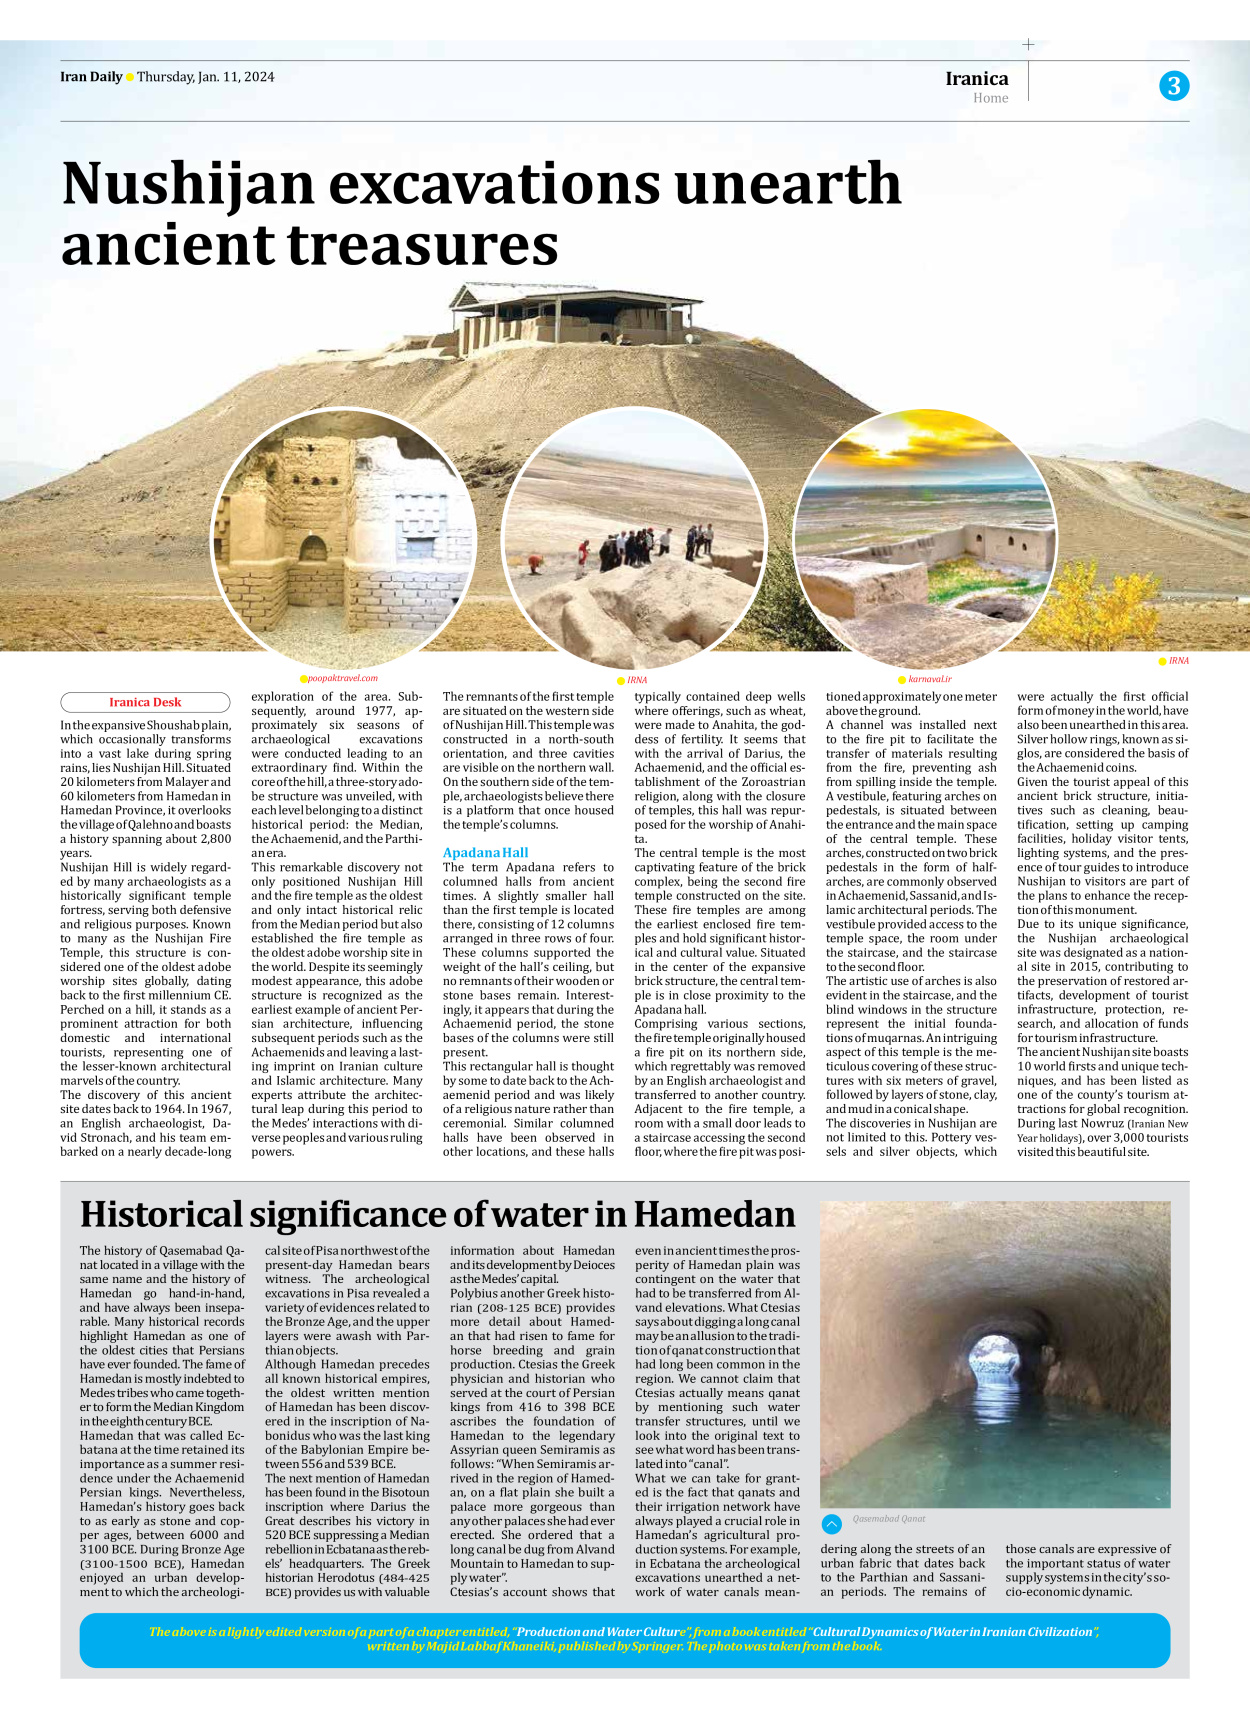 Iran Daily - Number Seven Thousand Four Hundred and Eighty Two - 11 January 2024 - Page 3